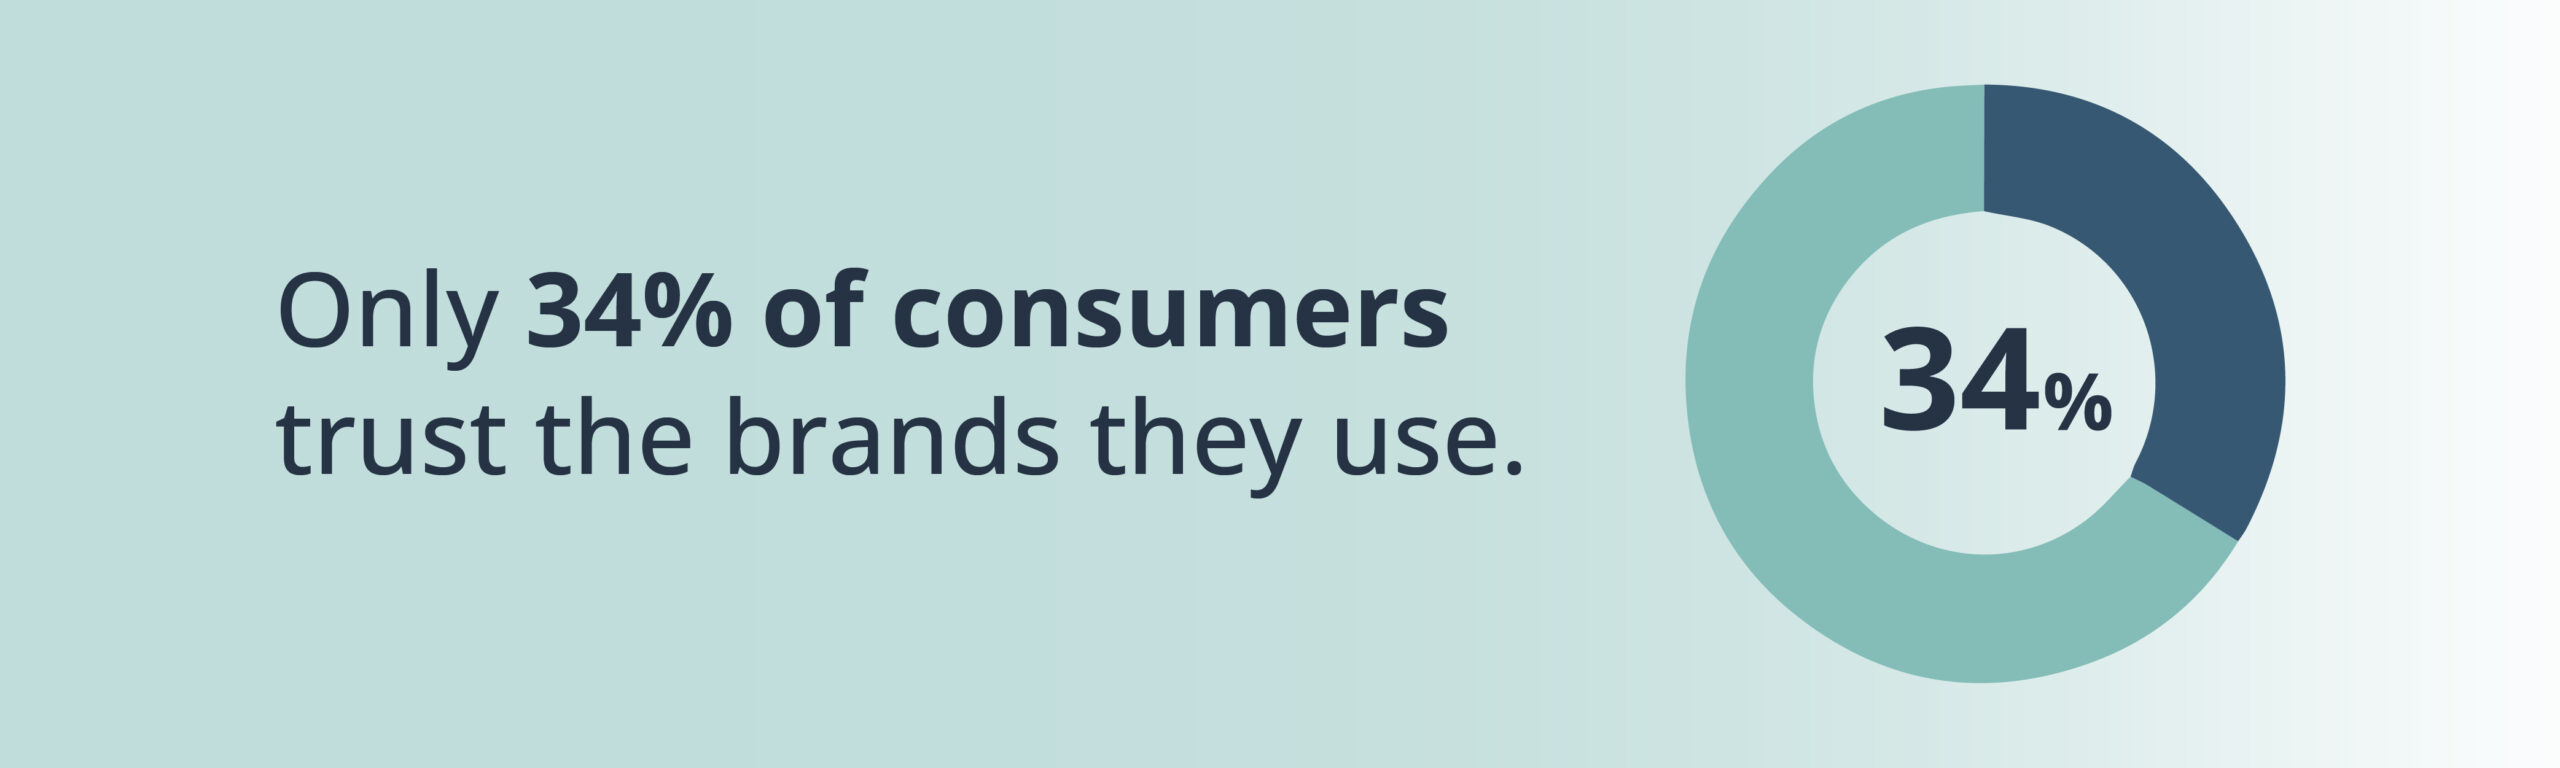 Only 34% of consumers trust the brands they use.